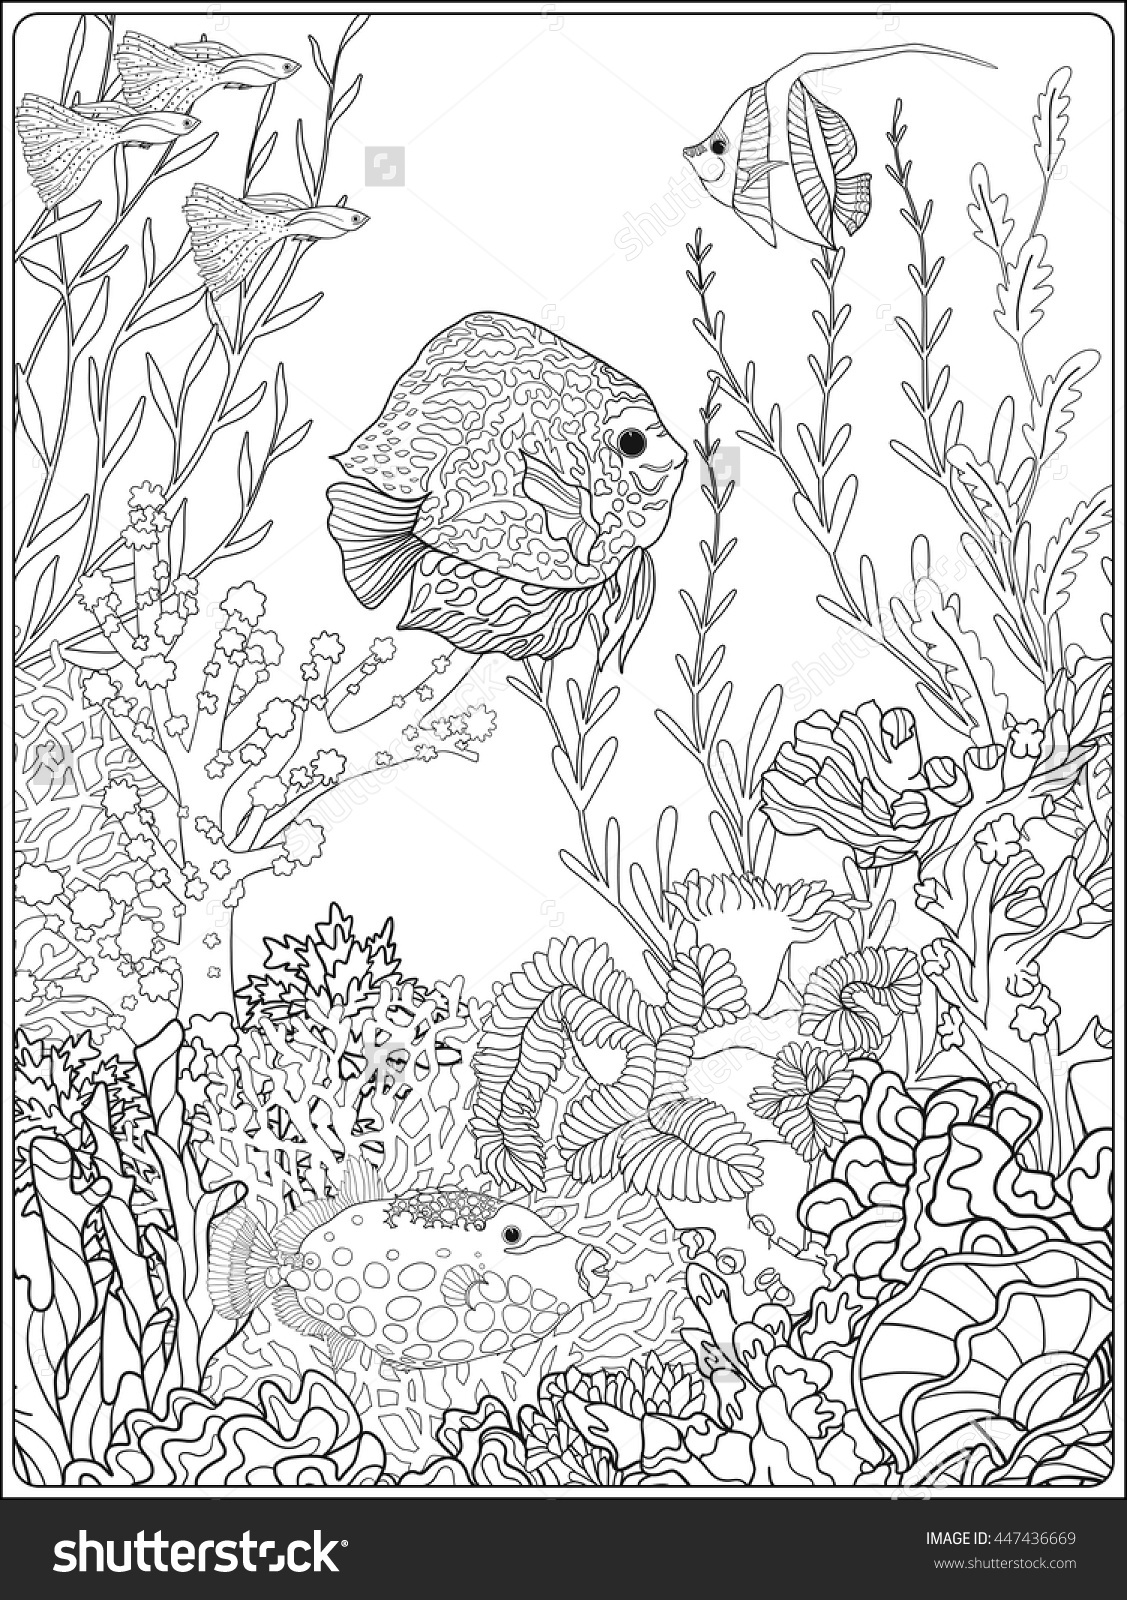 Sea World Coloring Pages at GetColoringscom Free